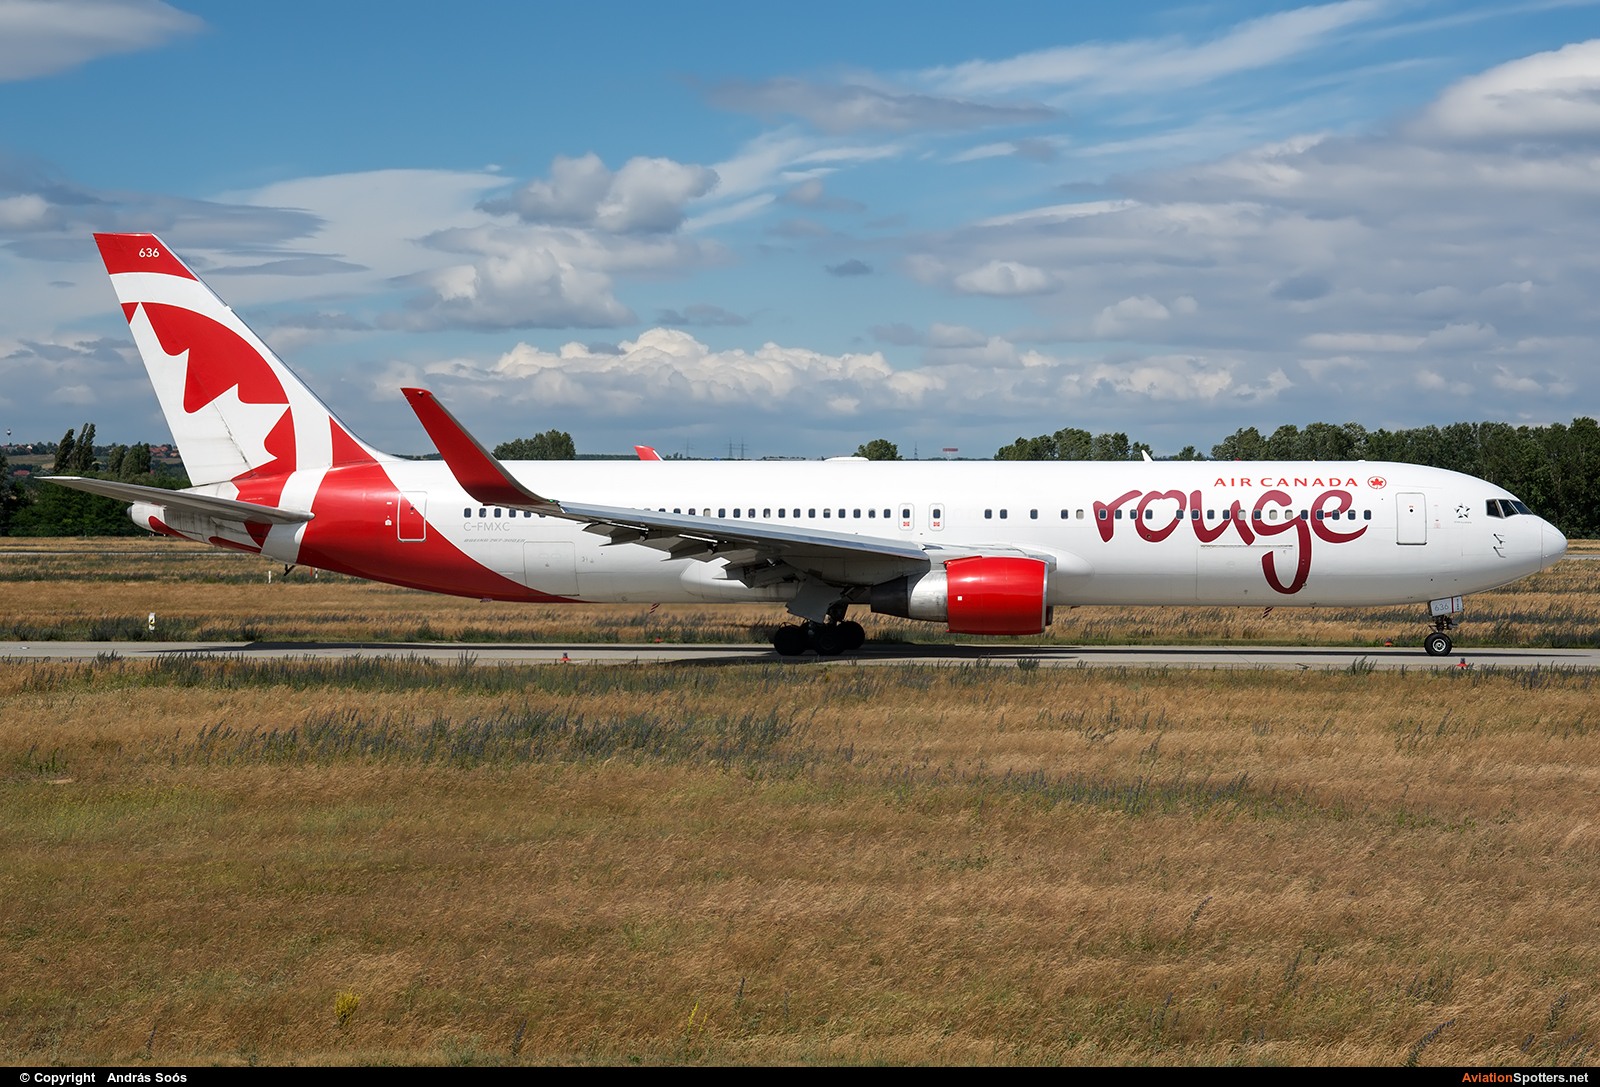 Air Canada Rouge  -  767-300ER  (C-FMXC) By András Soós (sas1965)